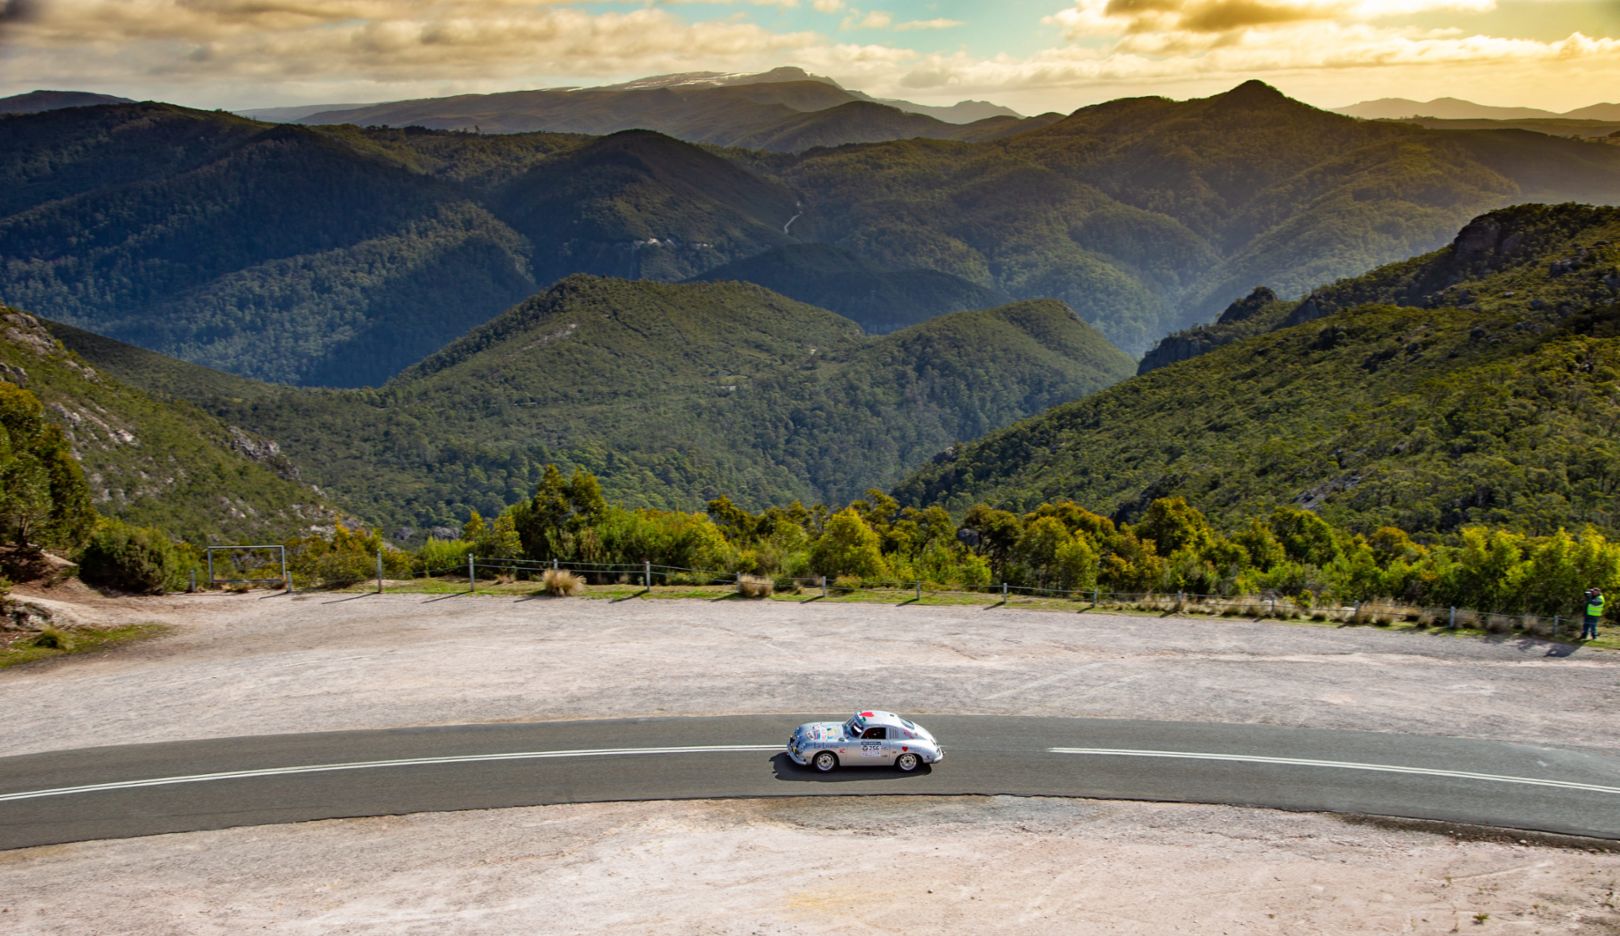 The Valkyrie Racing team covered 2,000 kilometers in six days at the Targa Tasmania in 2018. It was the second race that Renée Brinkerhoff took on for the 356 World Rally Tour project.